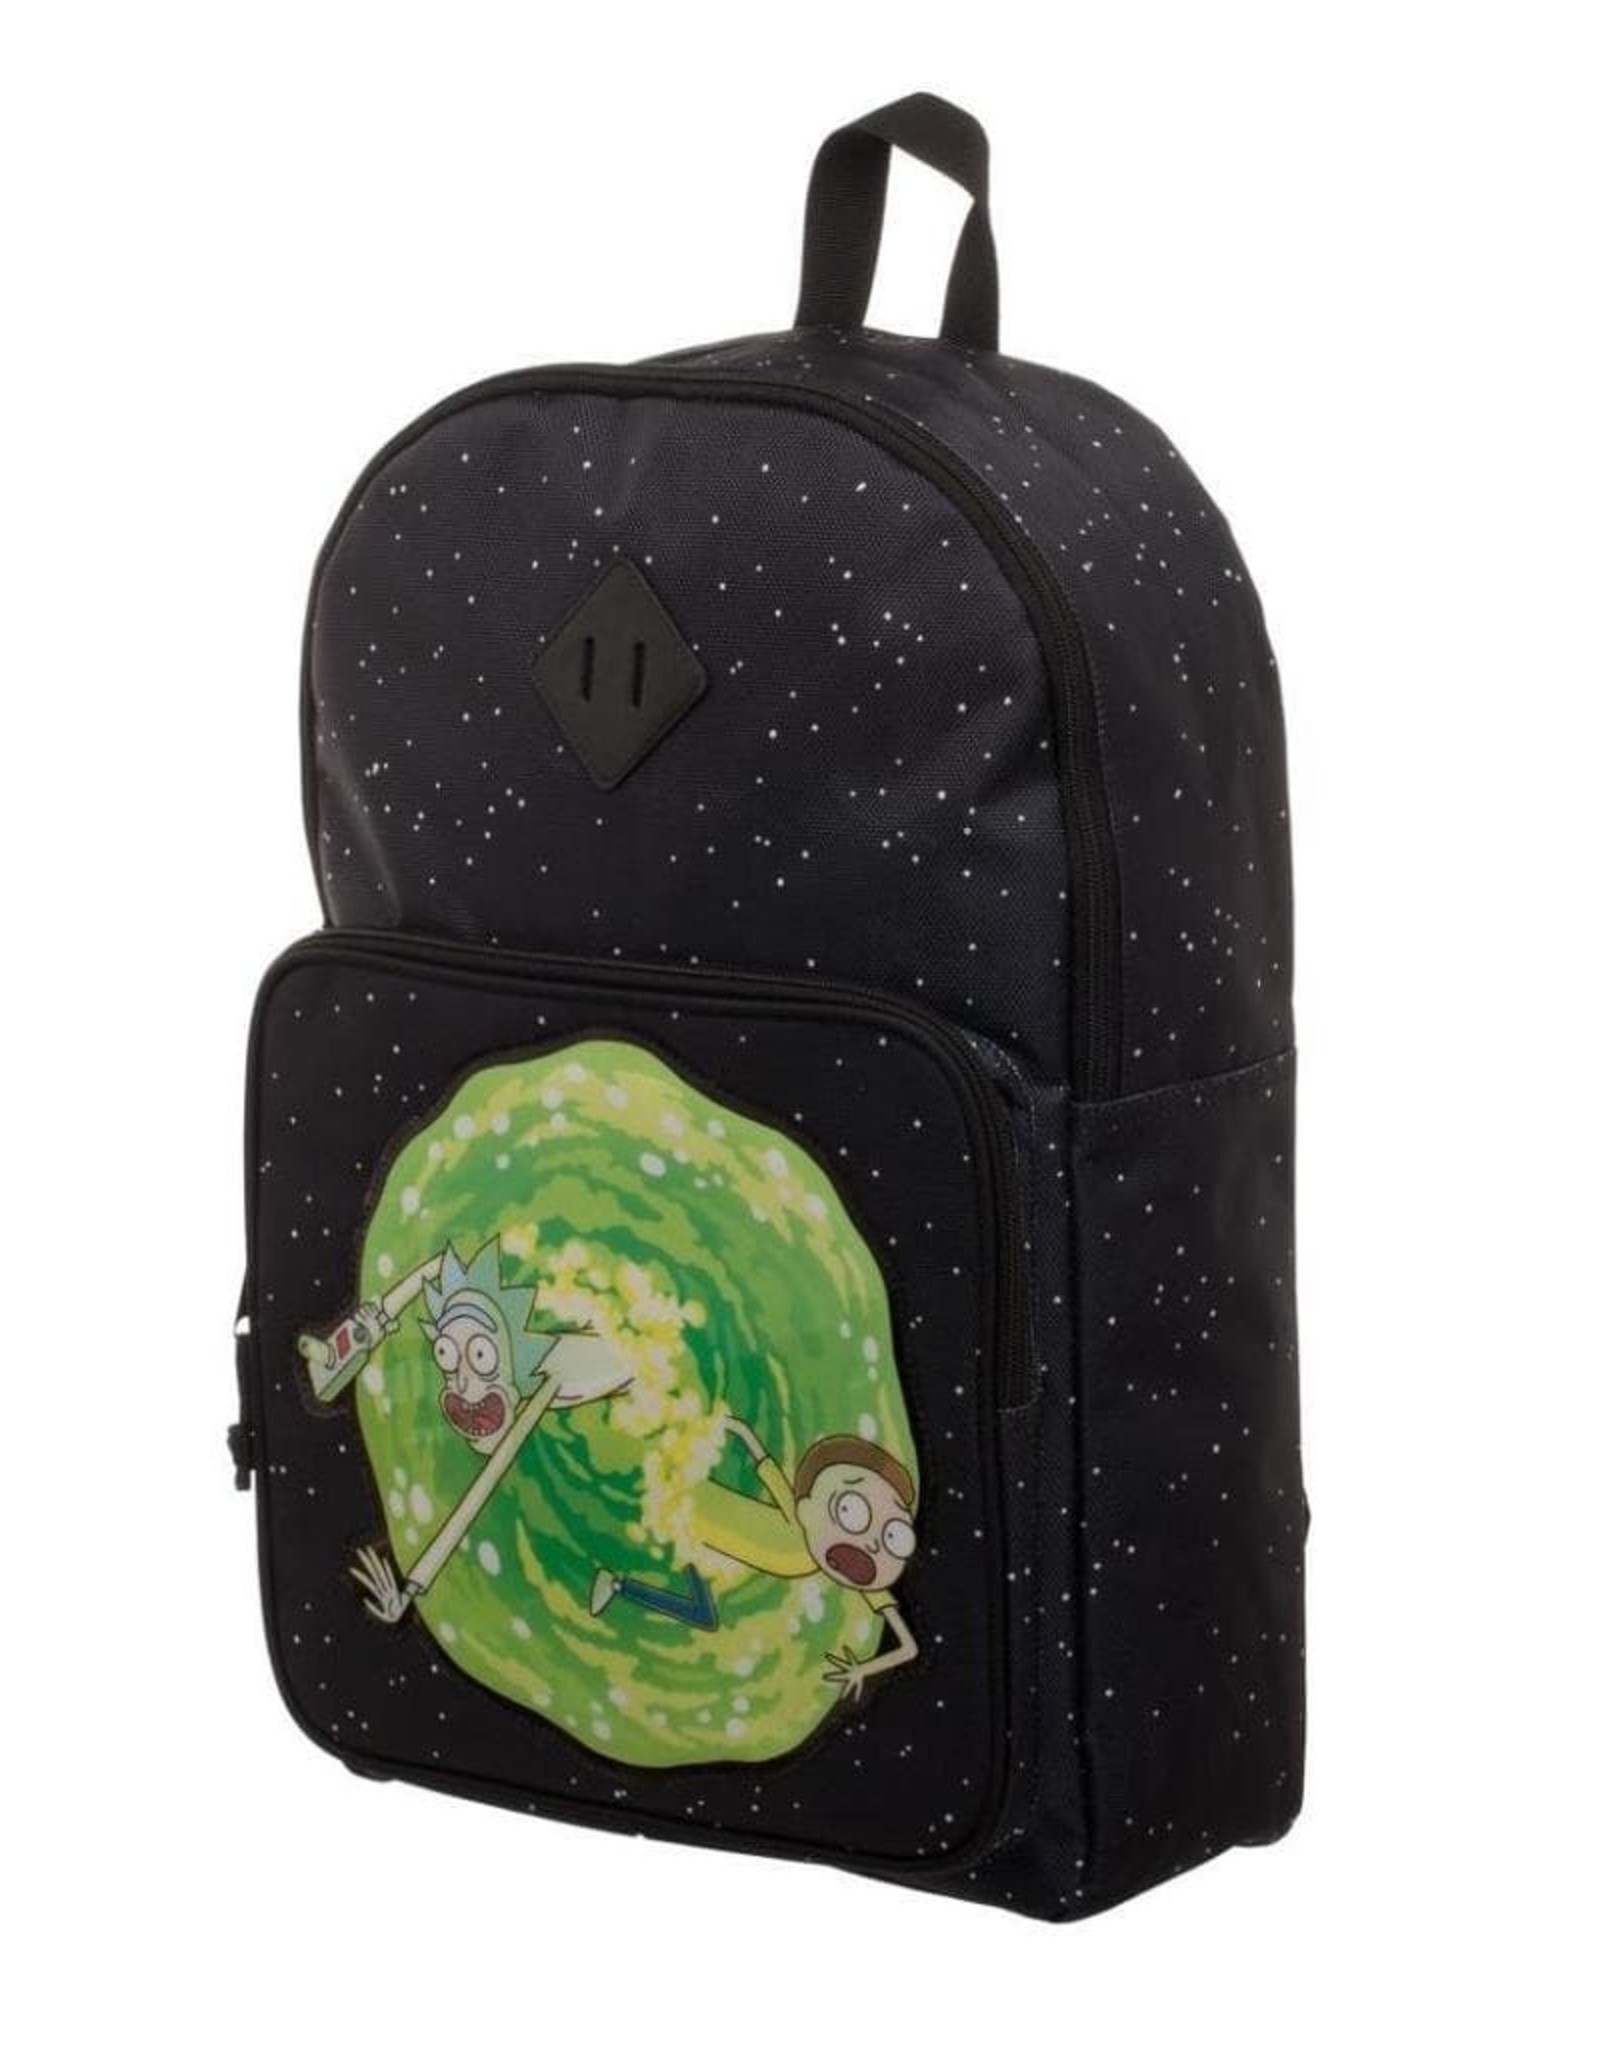 Rick and Morty Merchandise bags - Rick and Morty Portal backpack